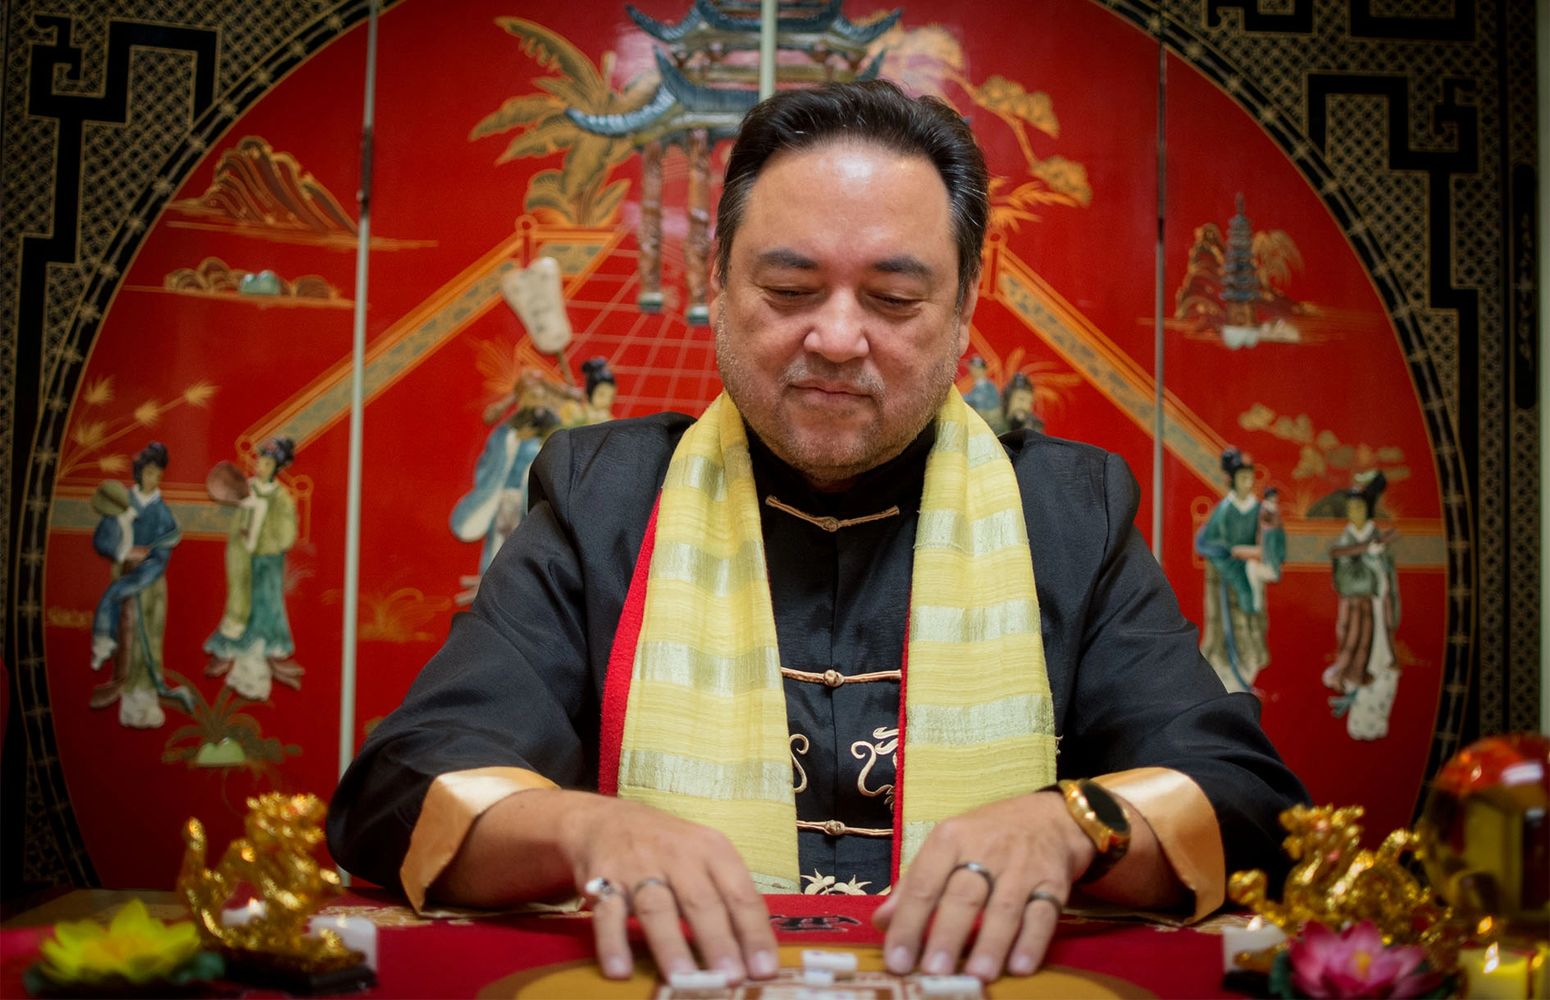 Fortune Teller Wanugee of Golden Dragon Fortunes predicts the future with Chinese Mahjong tiles